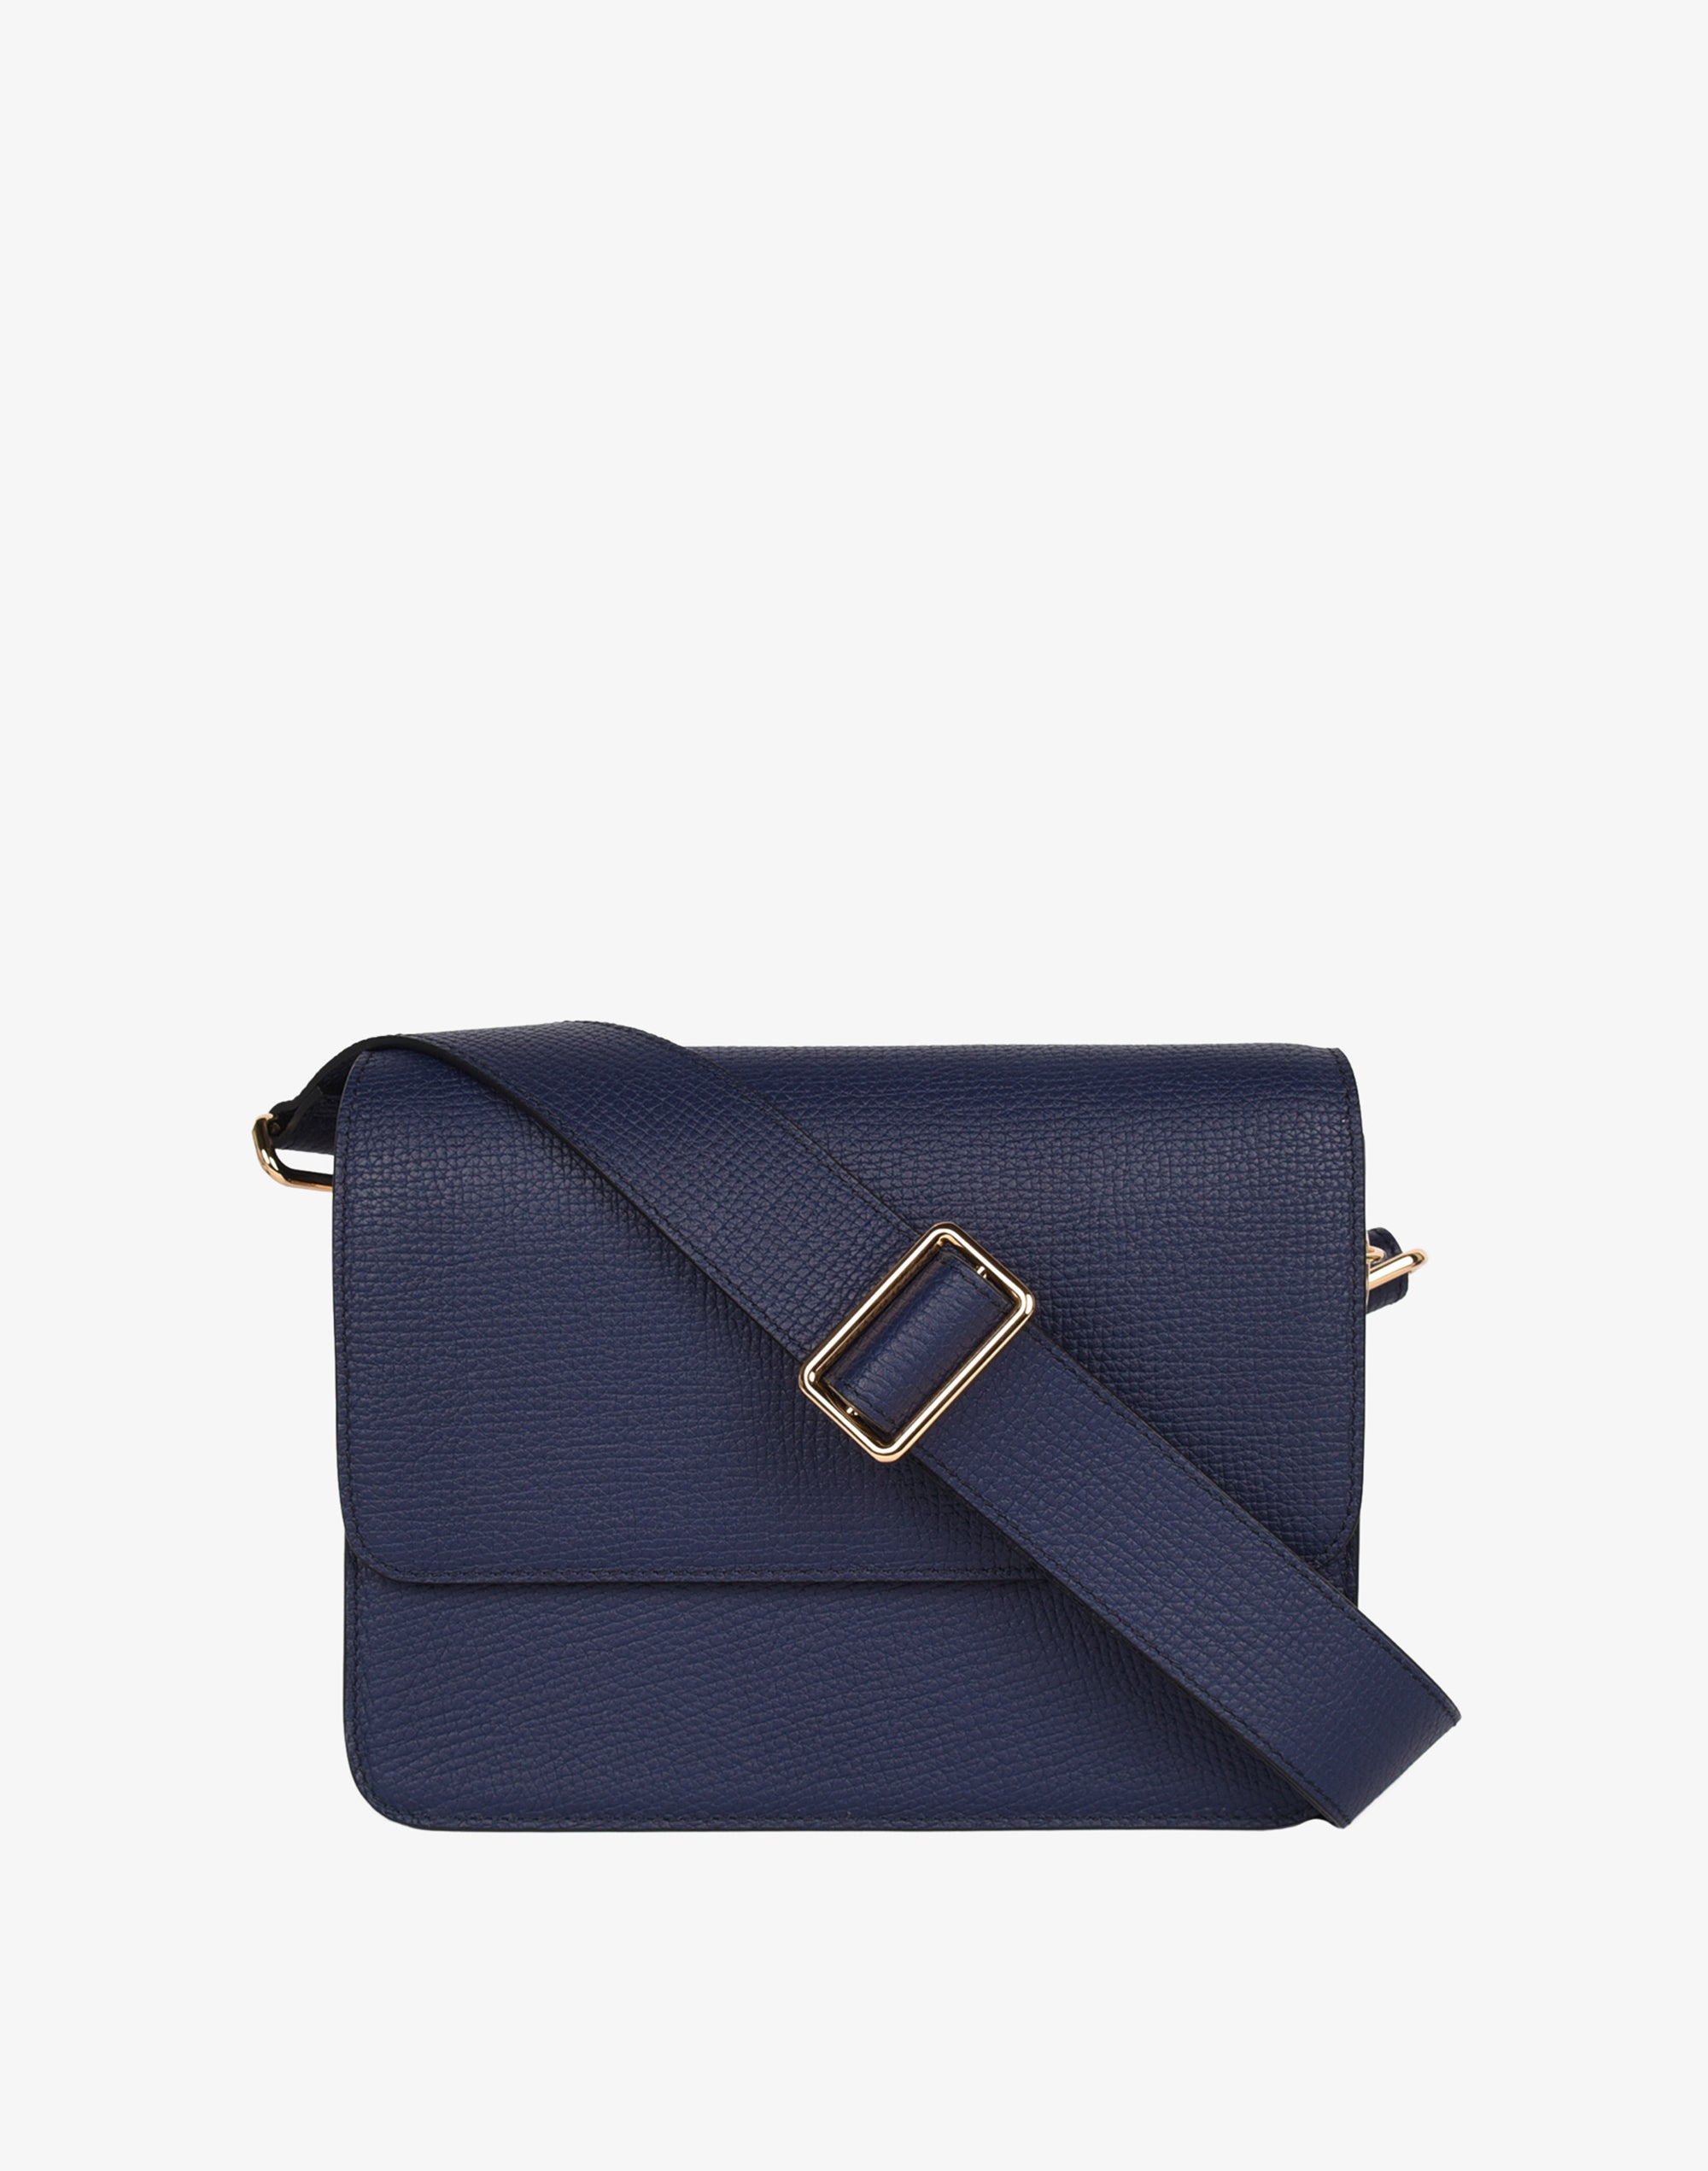 The Utility Bag in Navy - Men's Utility Tote Bags | Taylor Stitch